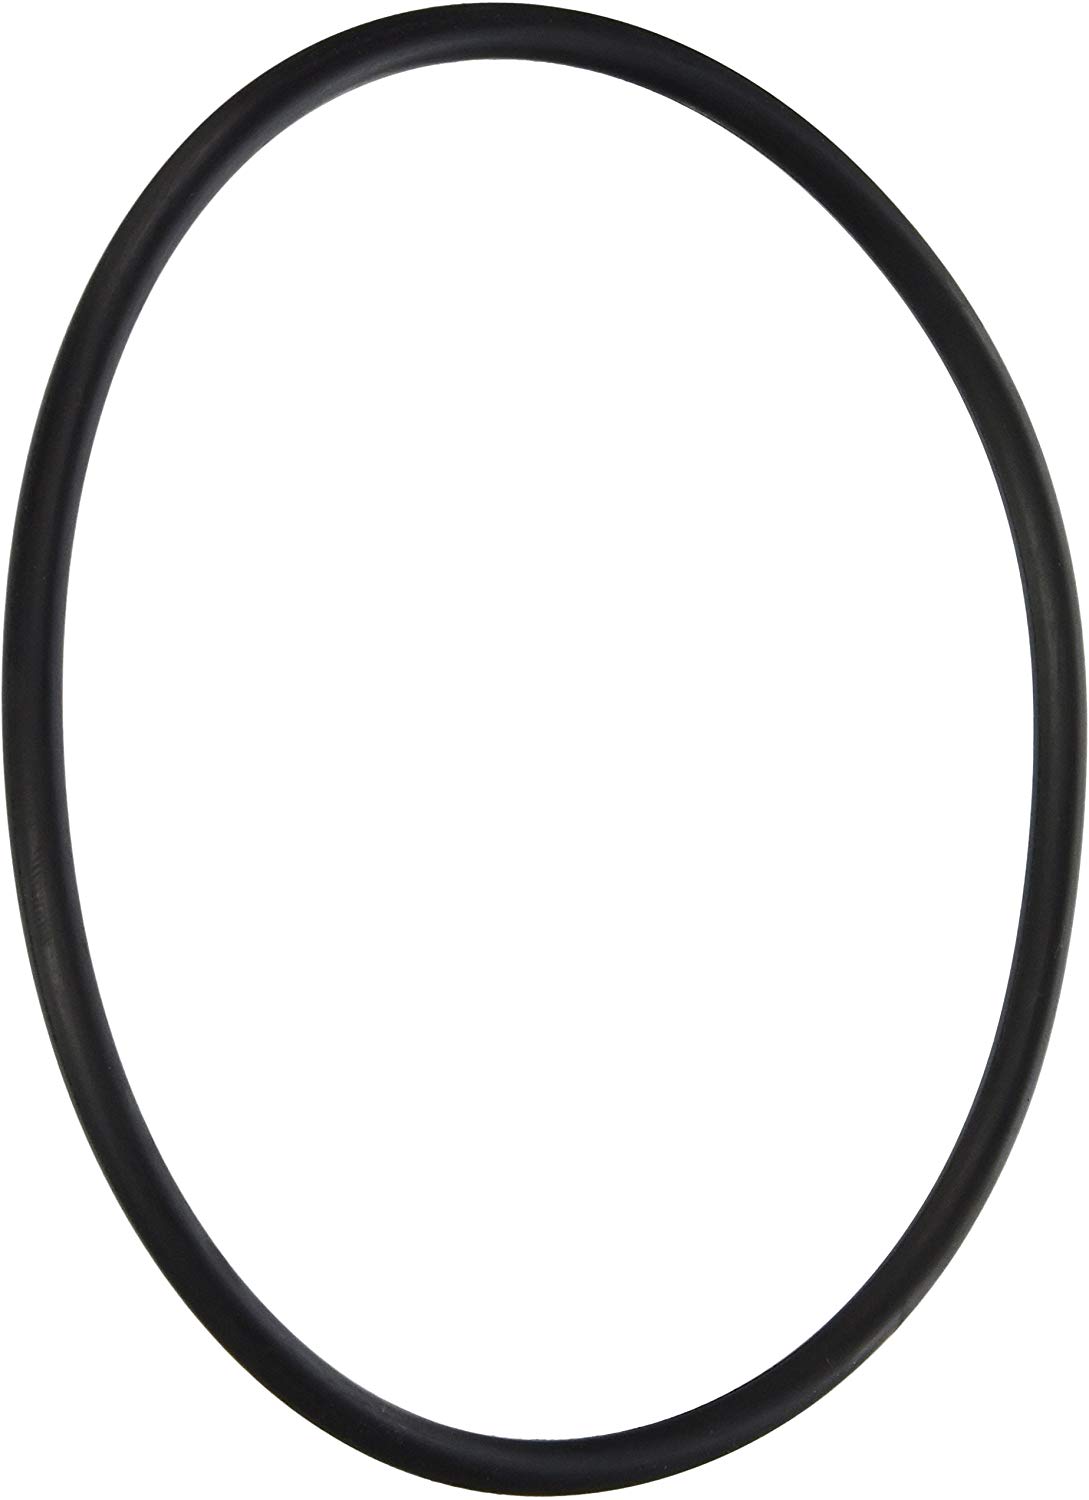 U9-375 Replacement for Pentair Max-E/Dura-Glas Cover O-Ring